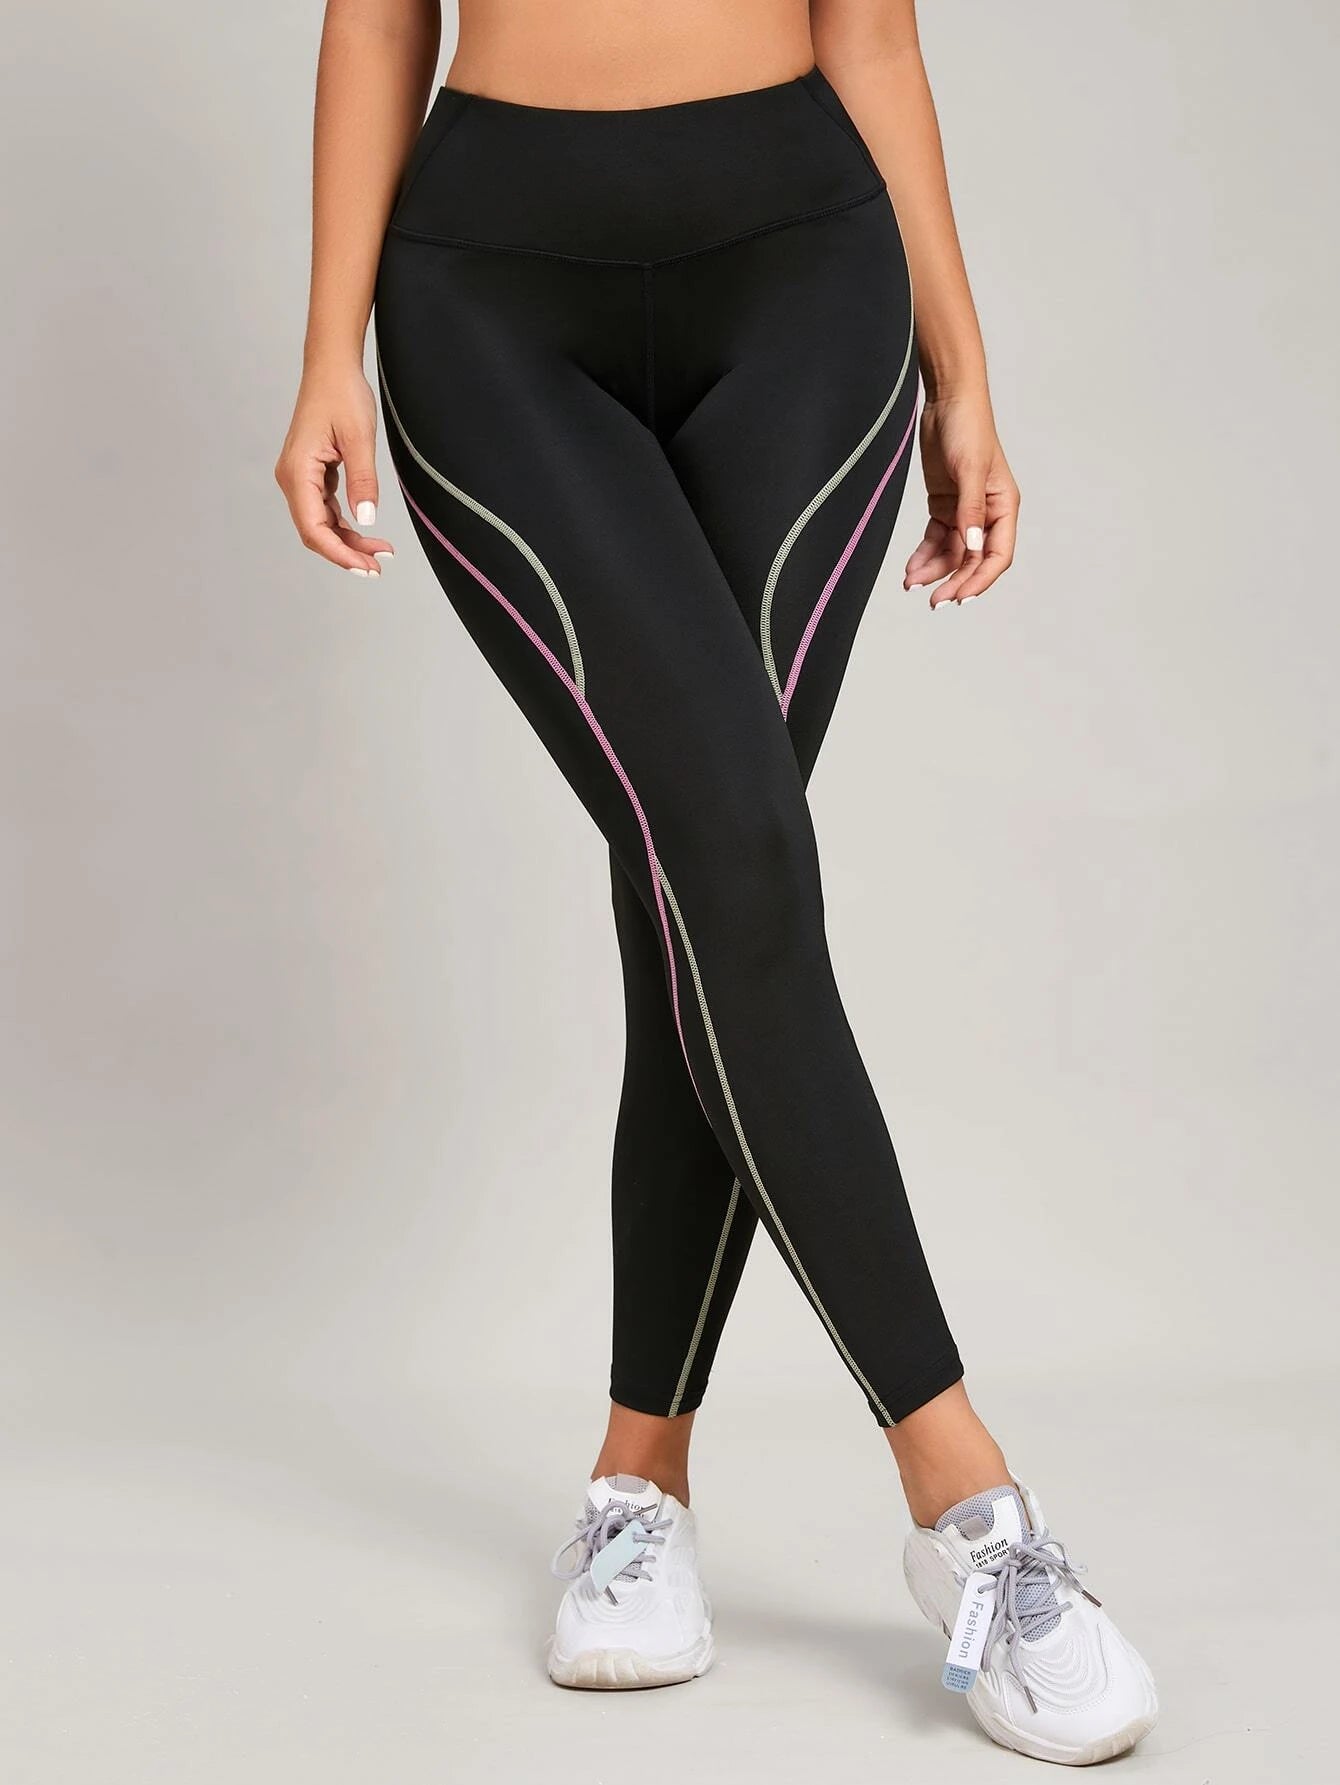 I'm a gym girl & found the best leggings ever on Shein - they make bums  look amazing | The Irish Sun